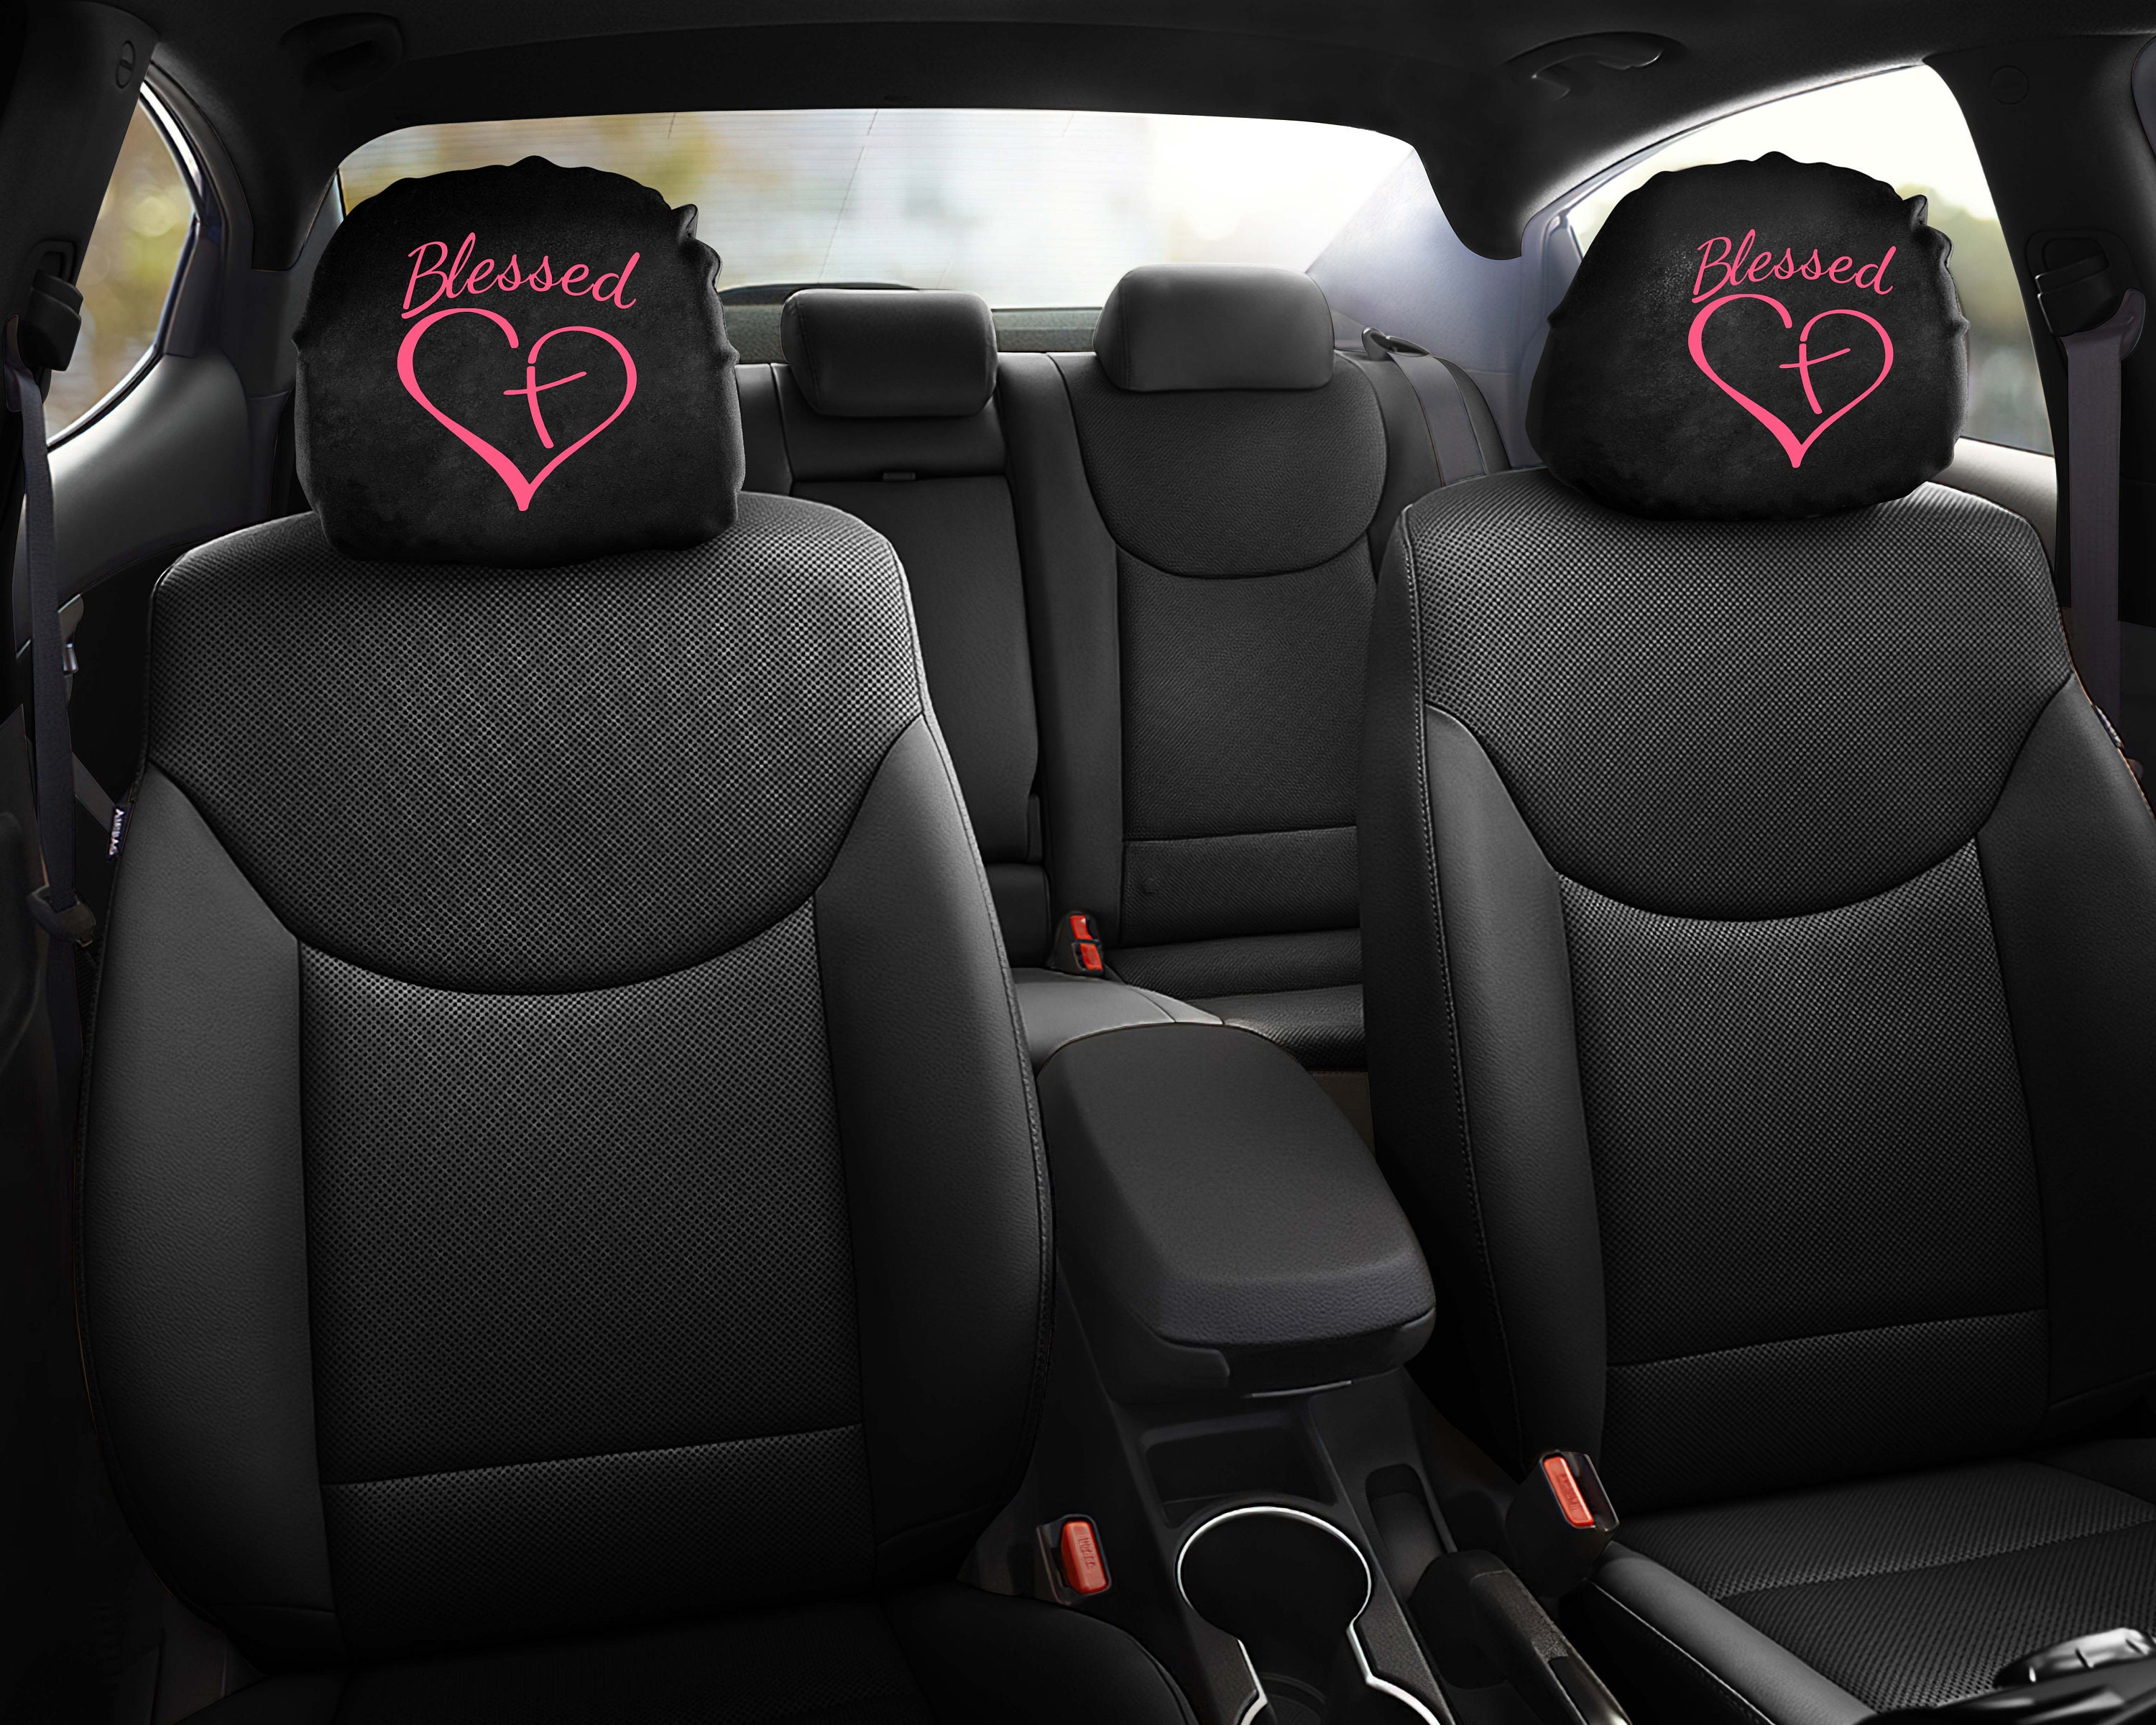 Father's Day Gift, Car Decor Headrest Covers, God Blessed Heart - Jesus Lover Gift, Set 2 Headrest Cover, Gift For Dad Car Accessories